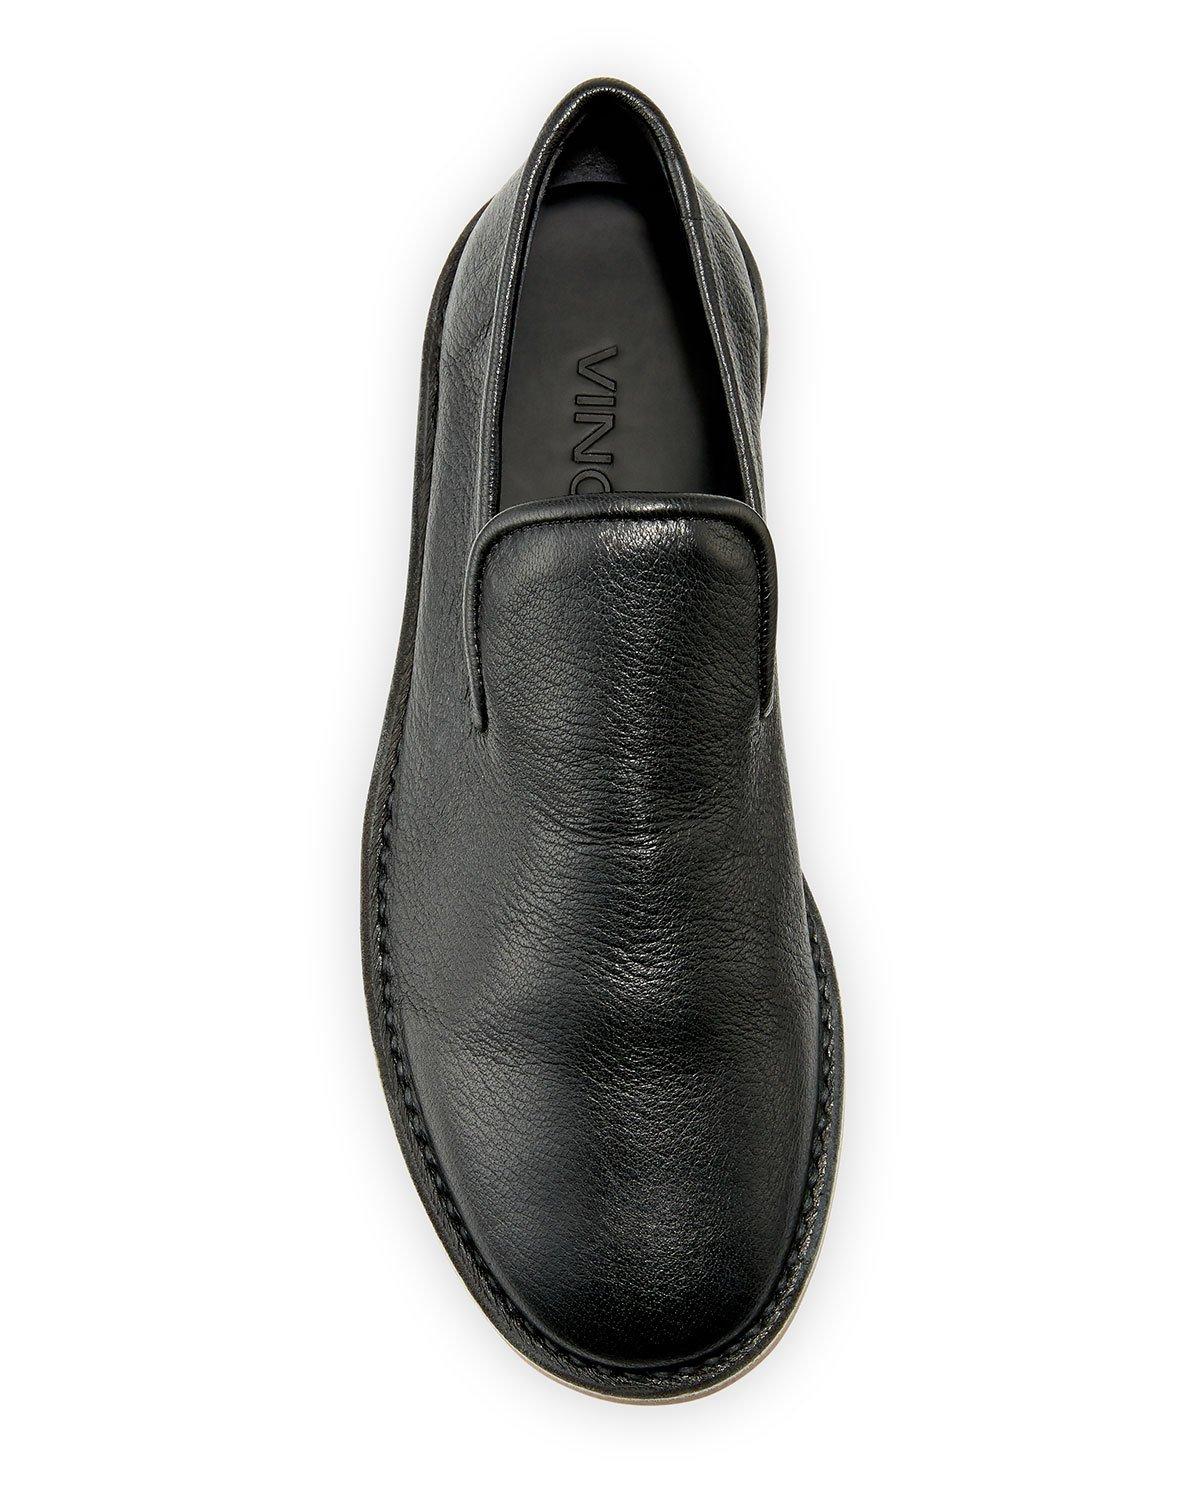 Lyst - Vince Percell Tumbled Leather Loafer in Black for Men